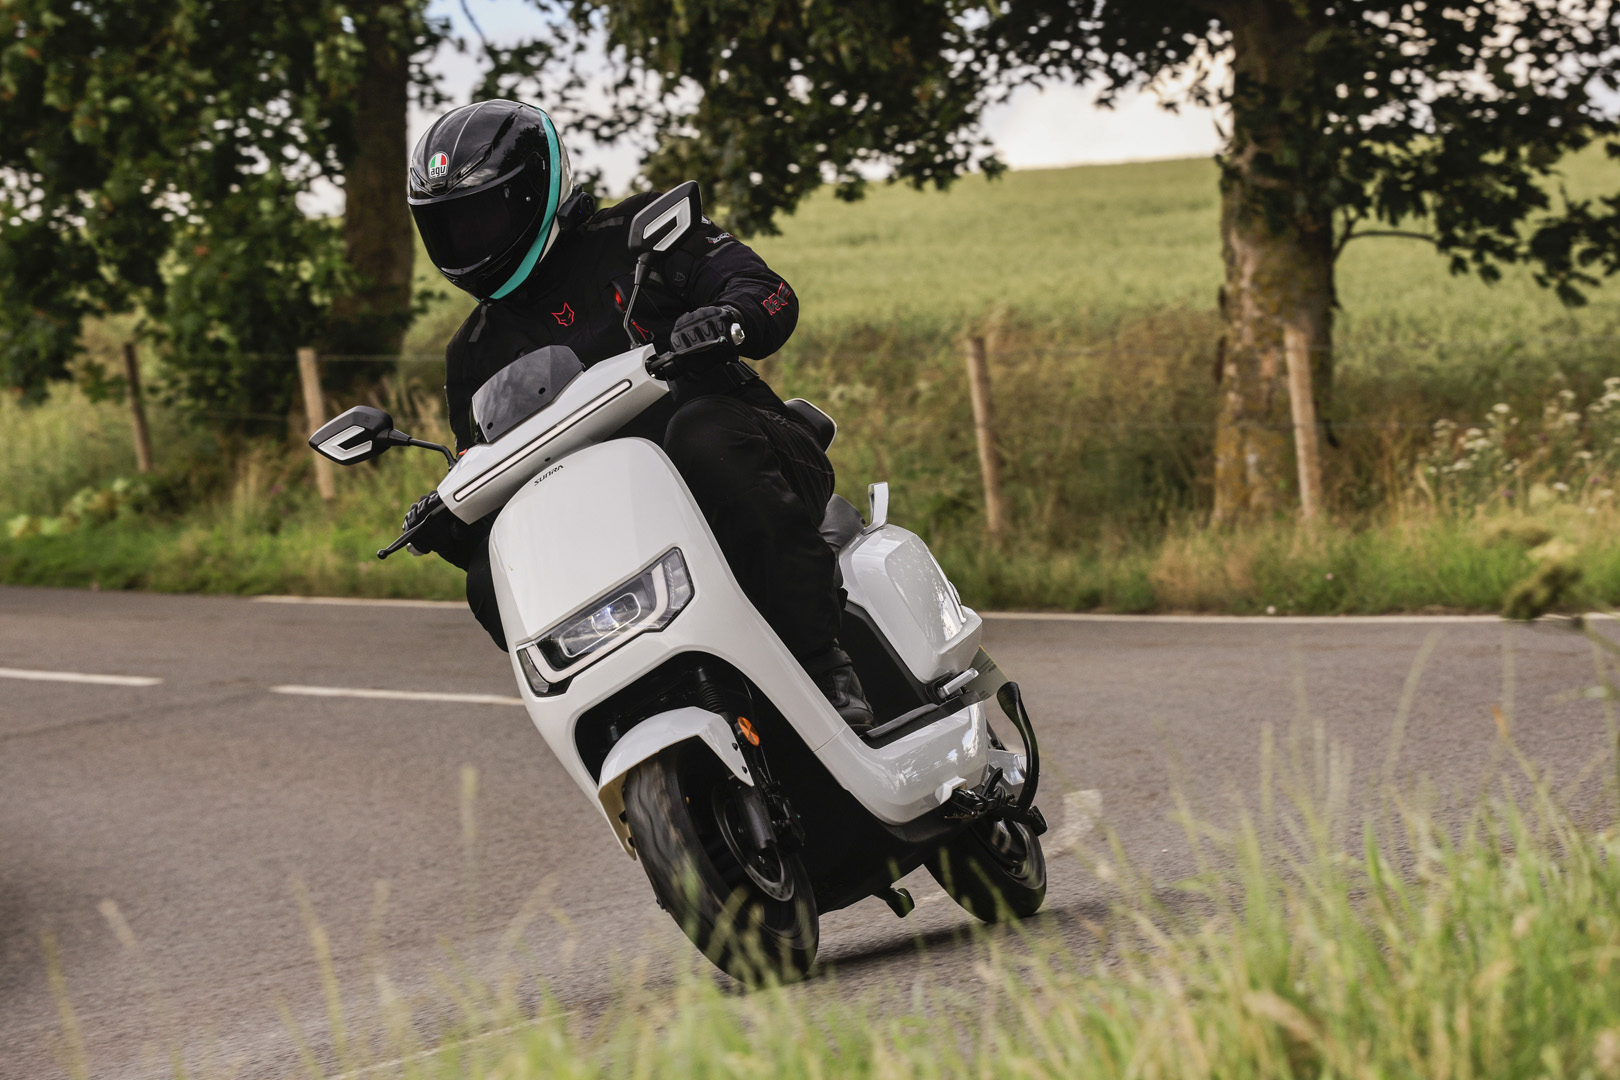 Sunra RoboS (2021) electric scooter road test and review Visordown